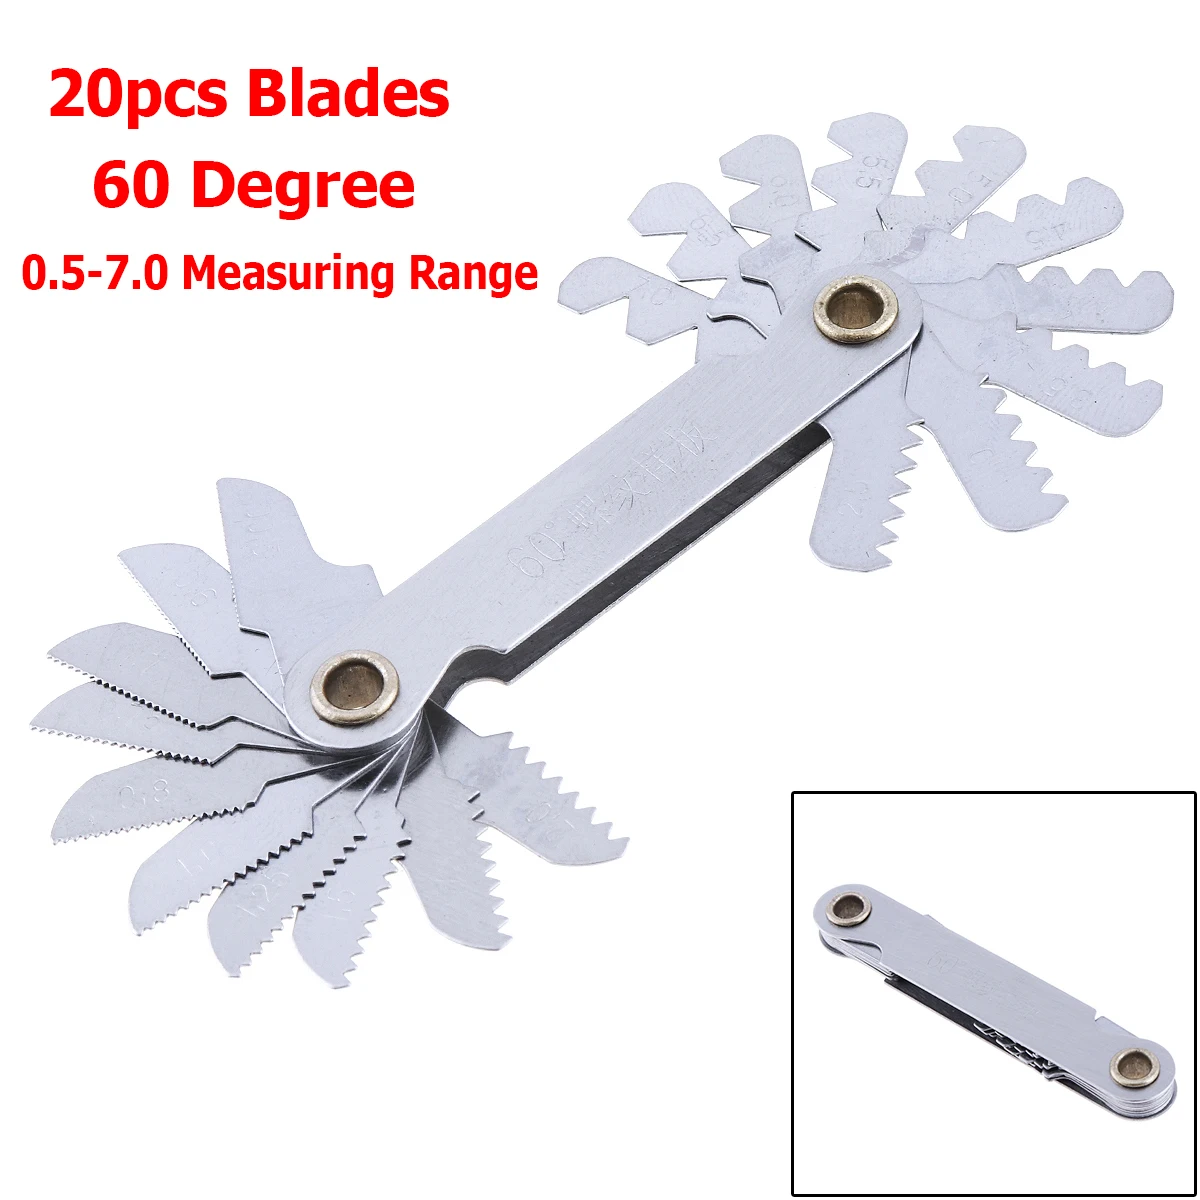 Stainless Steel Thread Gauge Metric60° Pitch Gauge Small size for School Home 